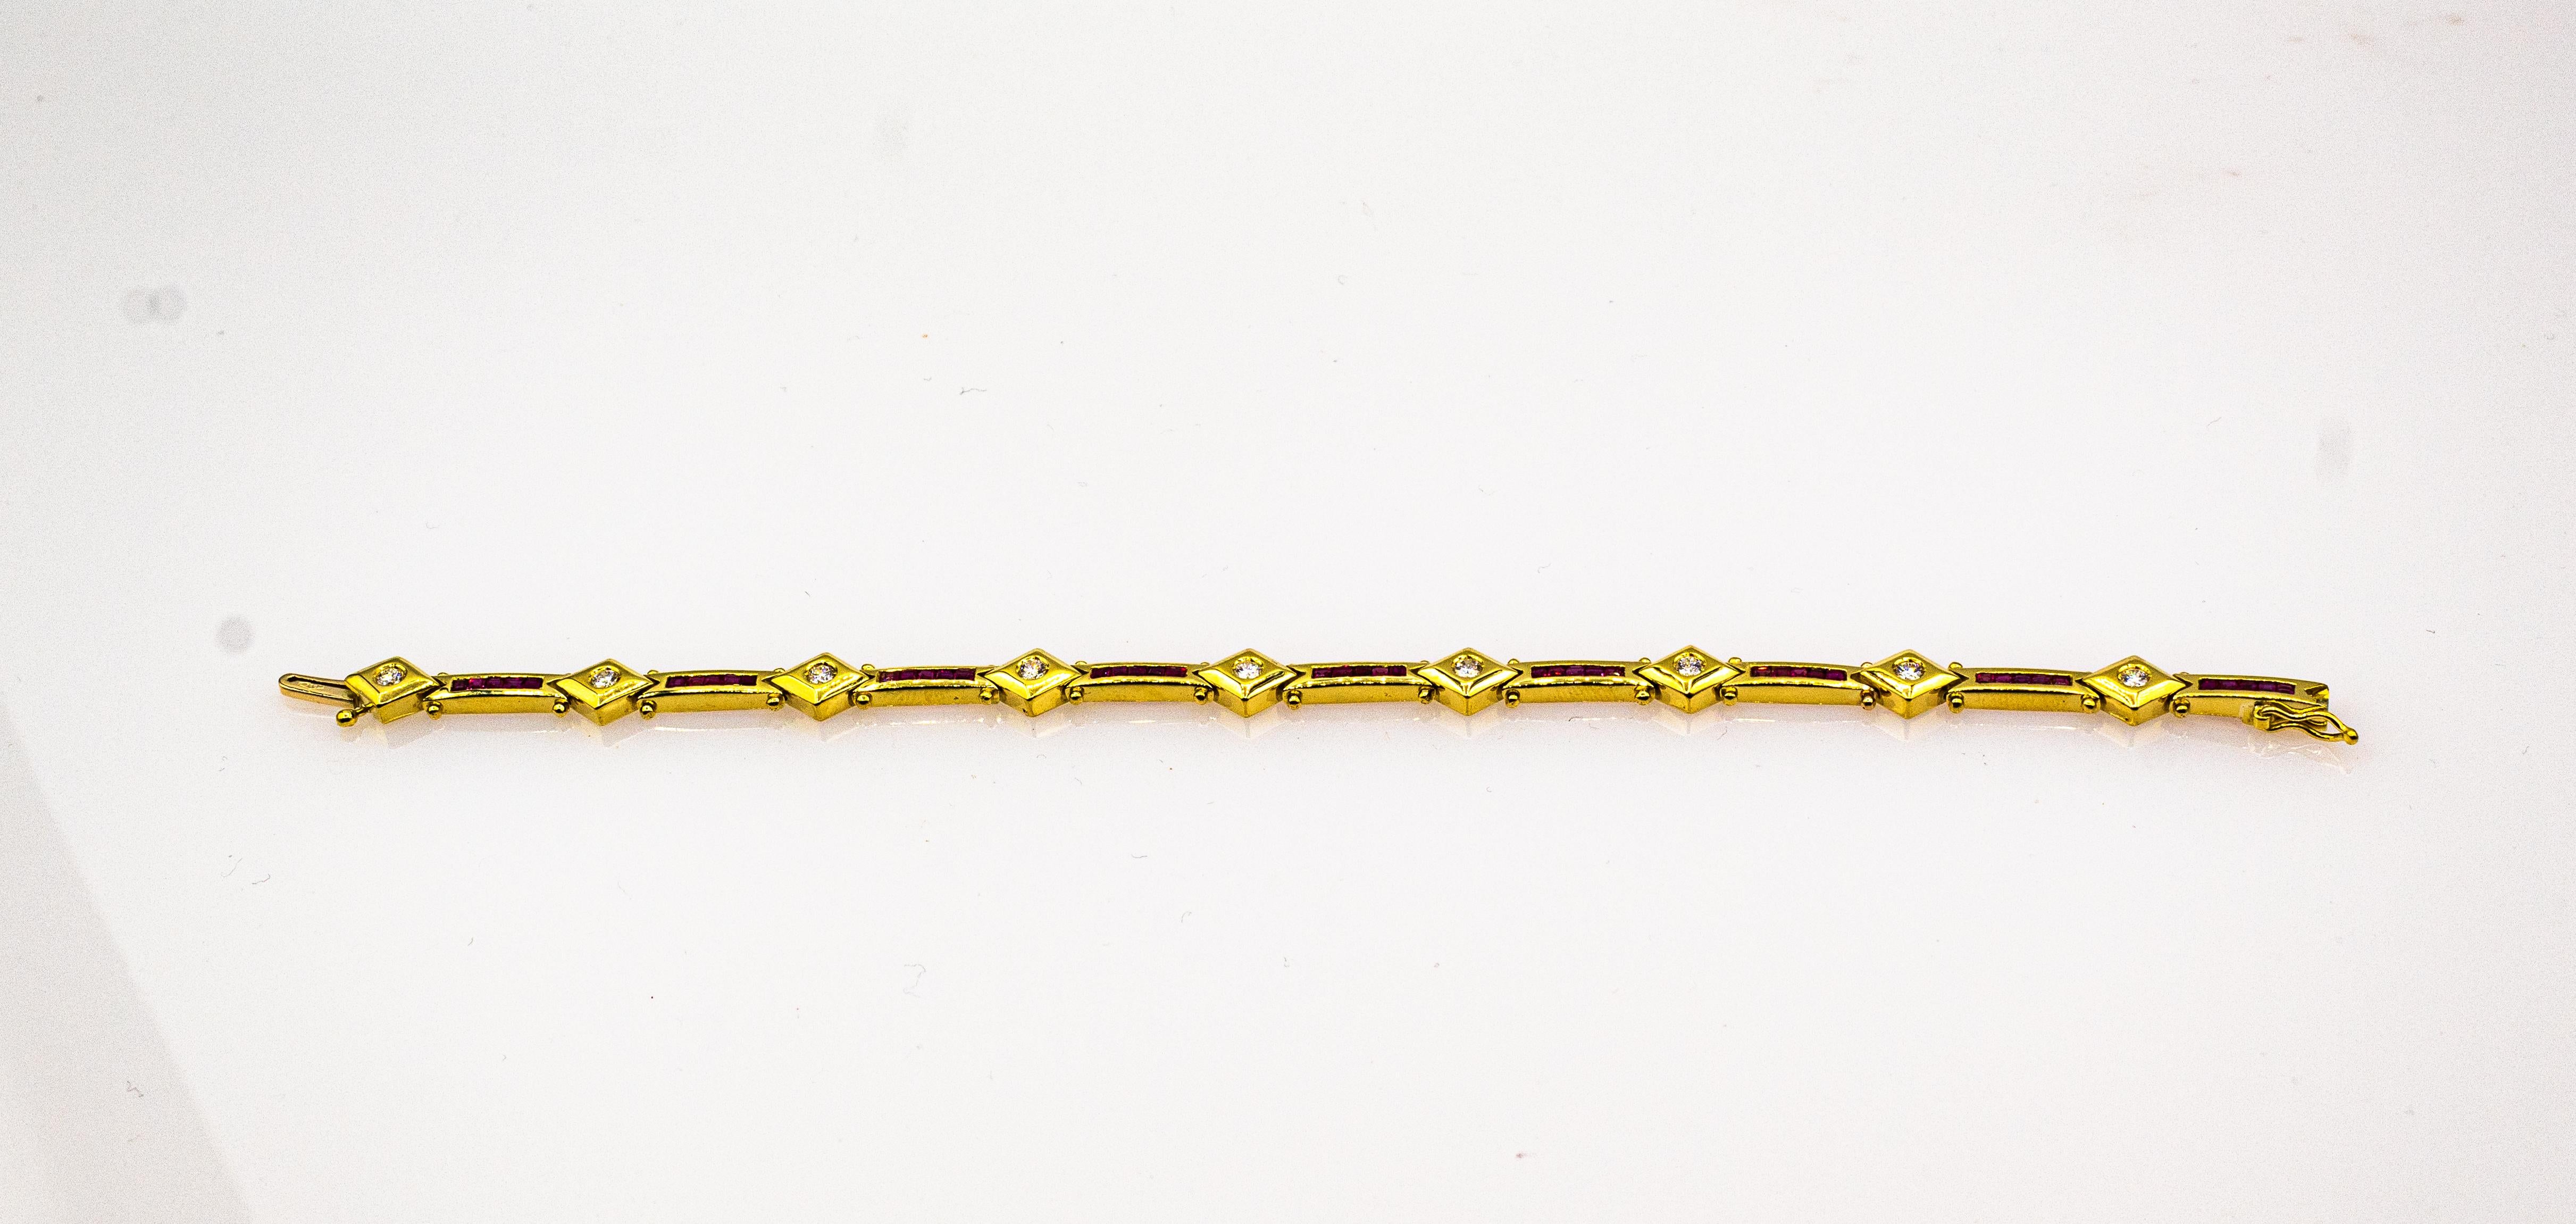 This Bracelet is made of 18K Yellow Gold.
This Bracelet has 0.72 Carats of White Brilliant Cut Diamonds.
This Bracelet has 2.00 Carats of Carré Cut Natural Rubies.

We're a workshop so every piece is handmade, customizable and resizable.